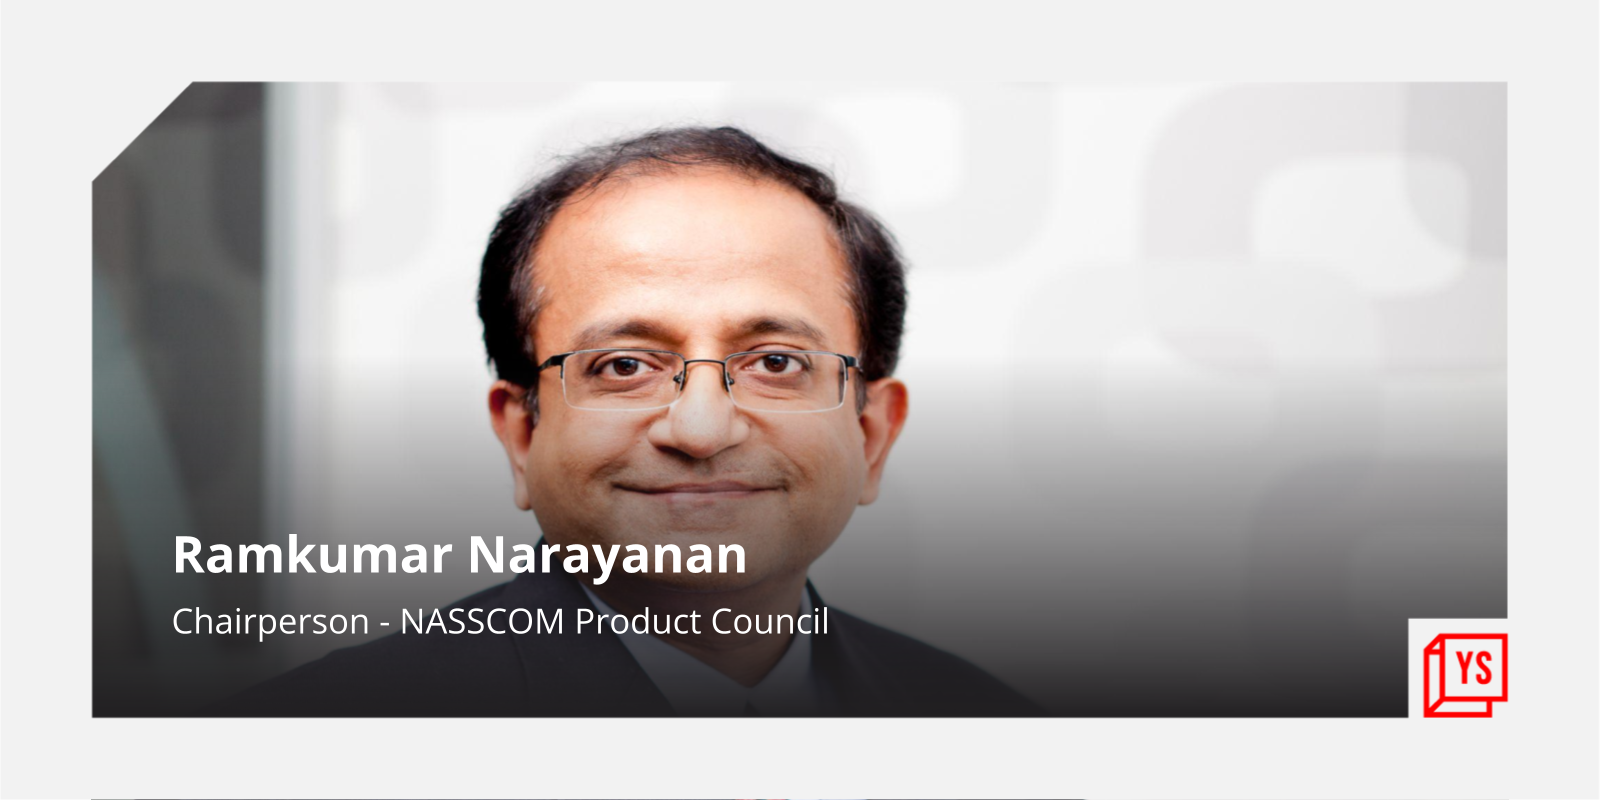 Export revenue from software products can reach $100B by 2030, says NASSCOM’s Ramkumar Narayanan